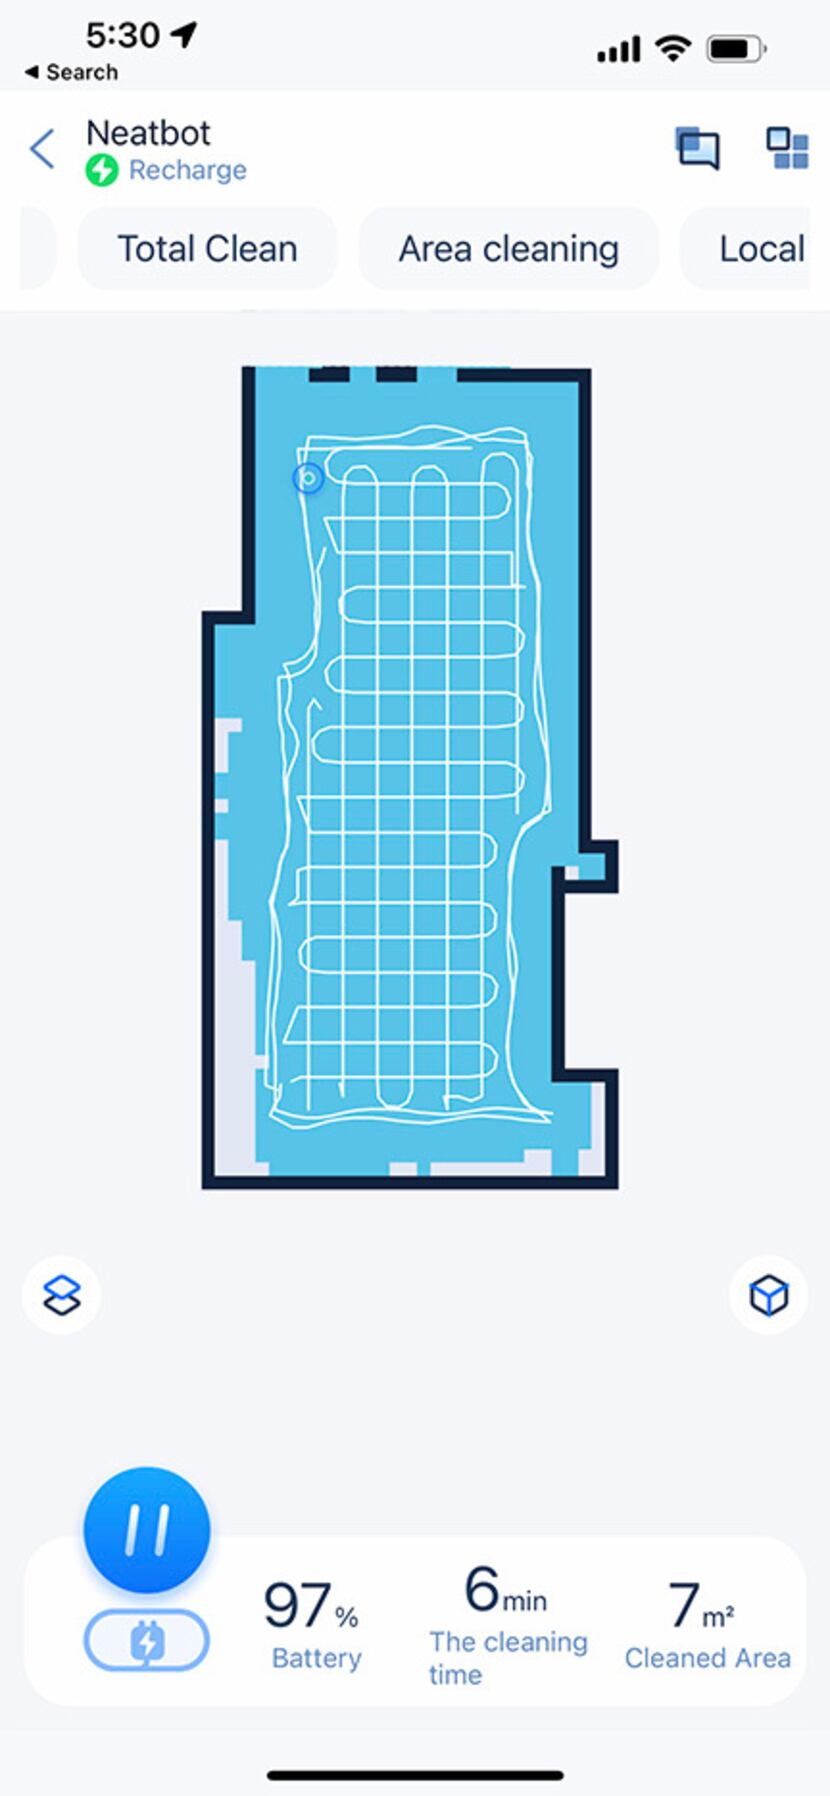 The Neabot app shows a map of your rooms and the route the vacuum takes in its cleaning.